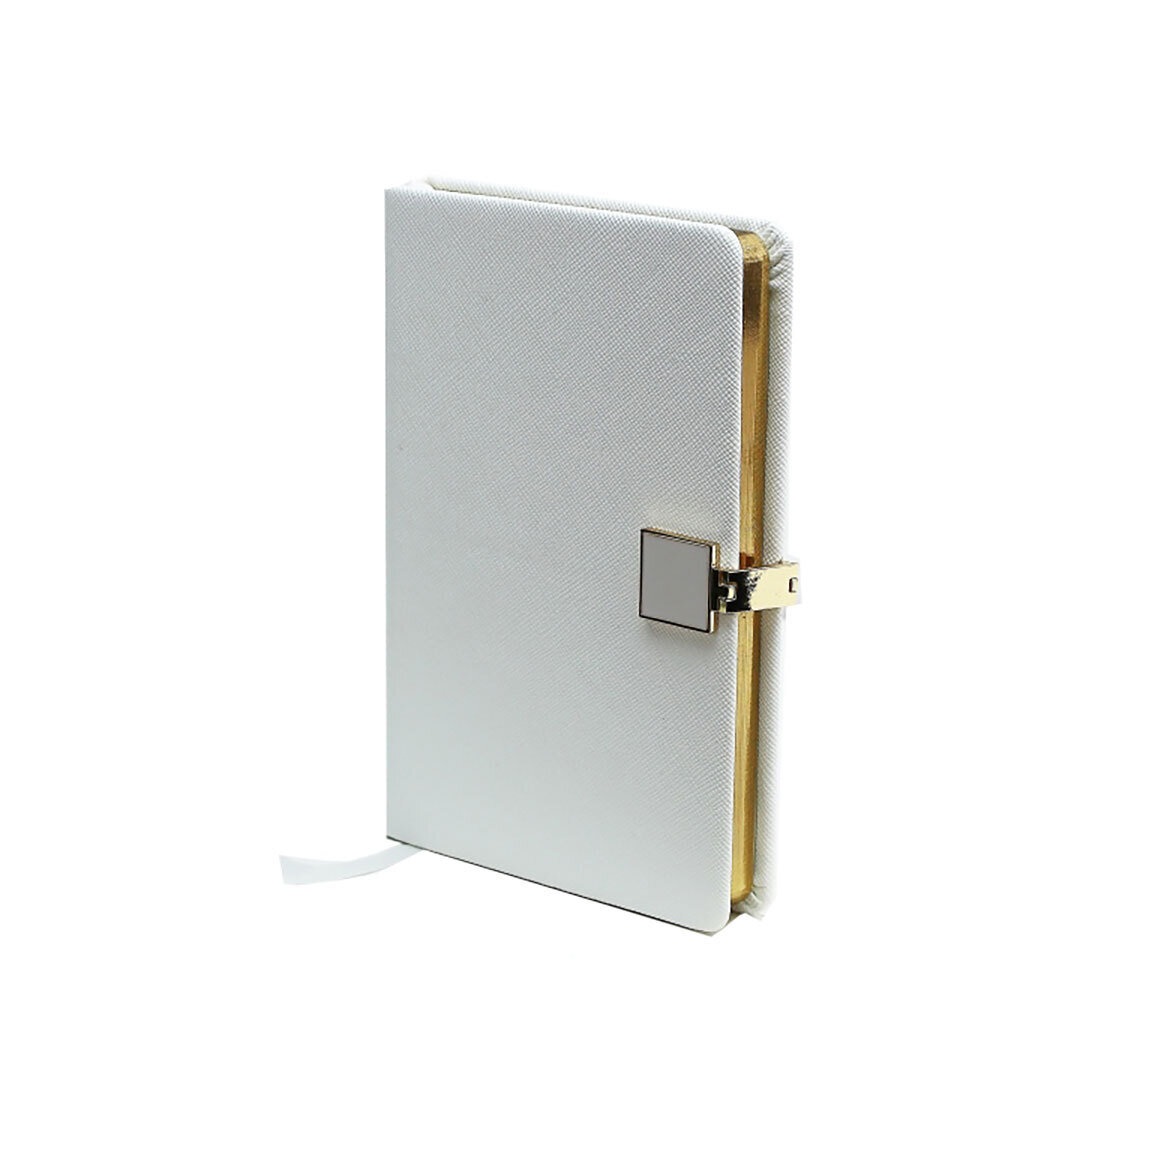 Addison Ross Notebook A6 Gold White Pu Leather NB1205